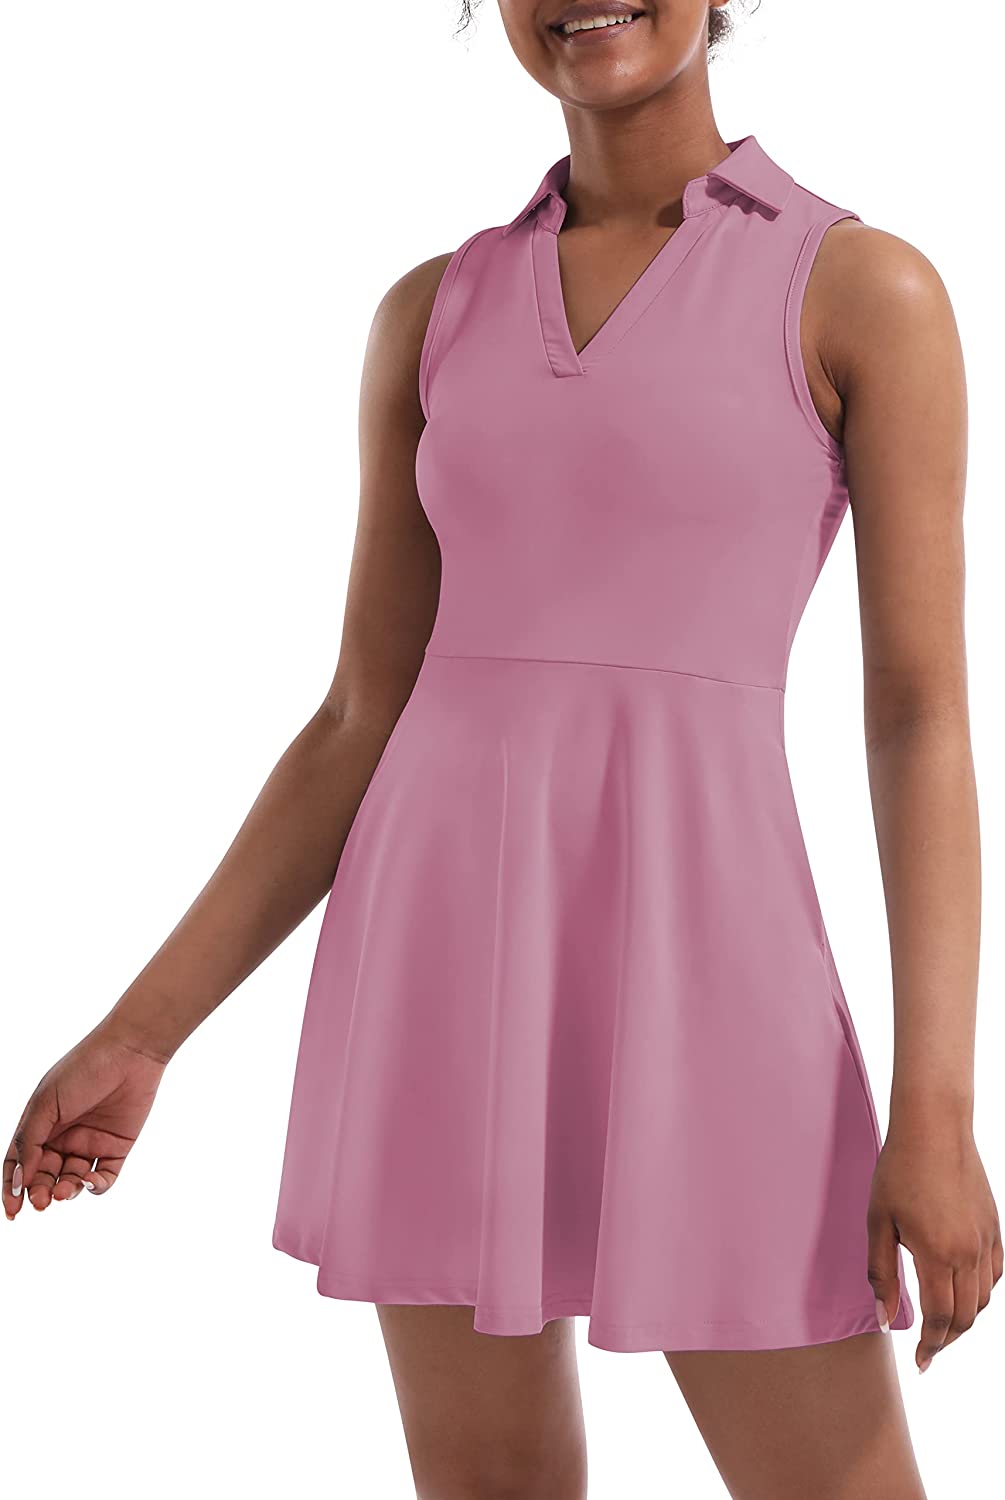 Fengbay Tennis Dress for Women,Golf Dress with Built in Shorts with 4  Pockets for Sleeveless Athletic Workout Dress in Kuwait